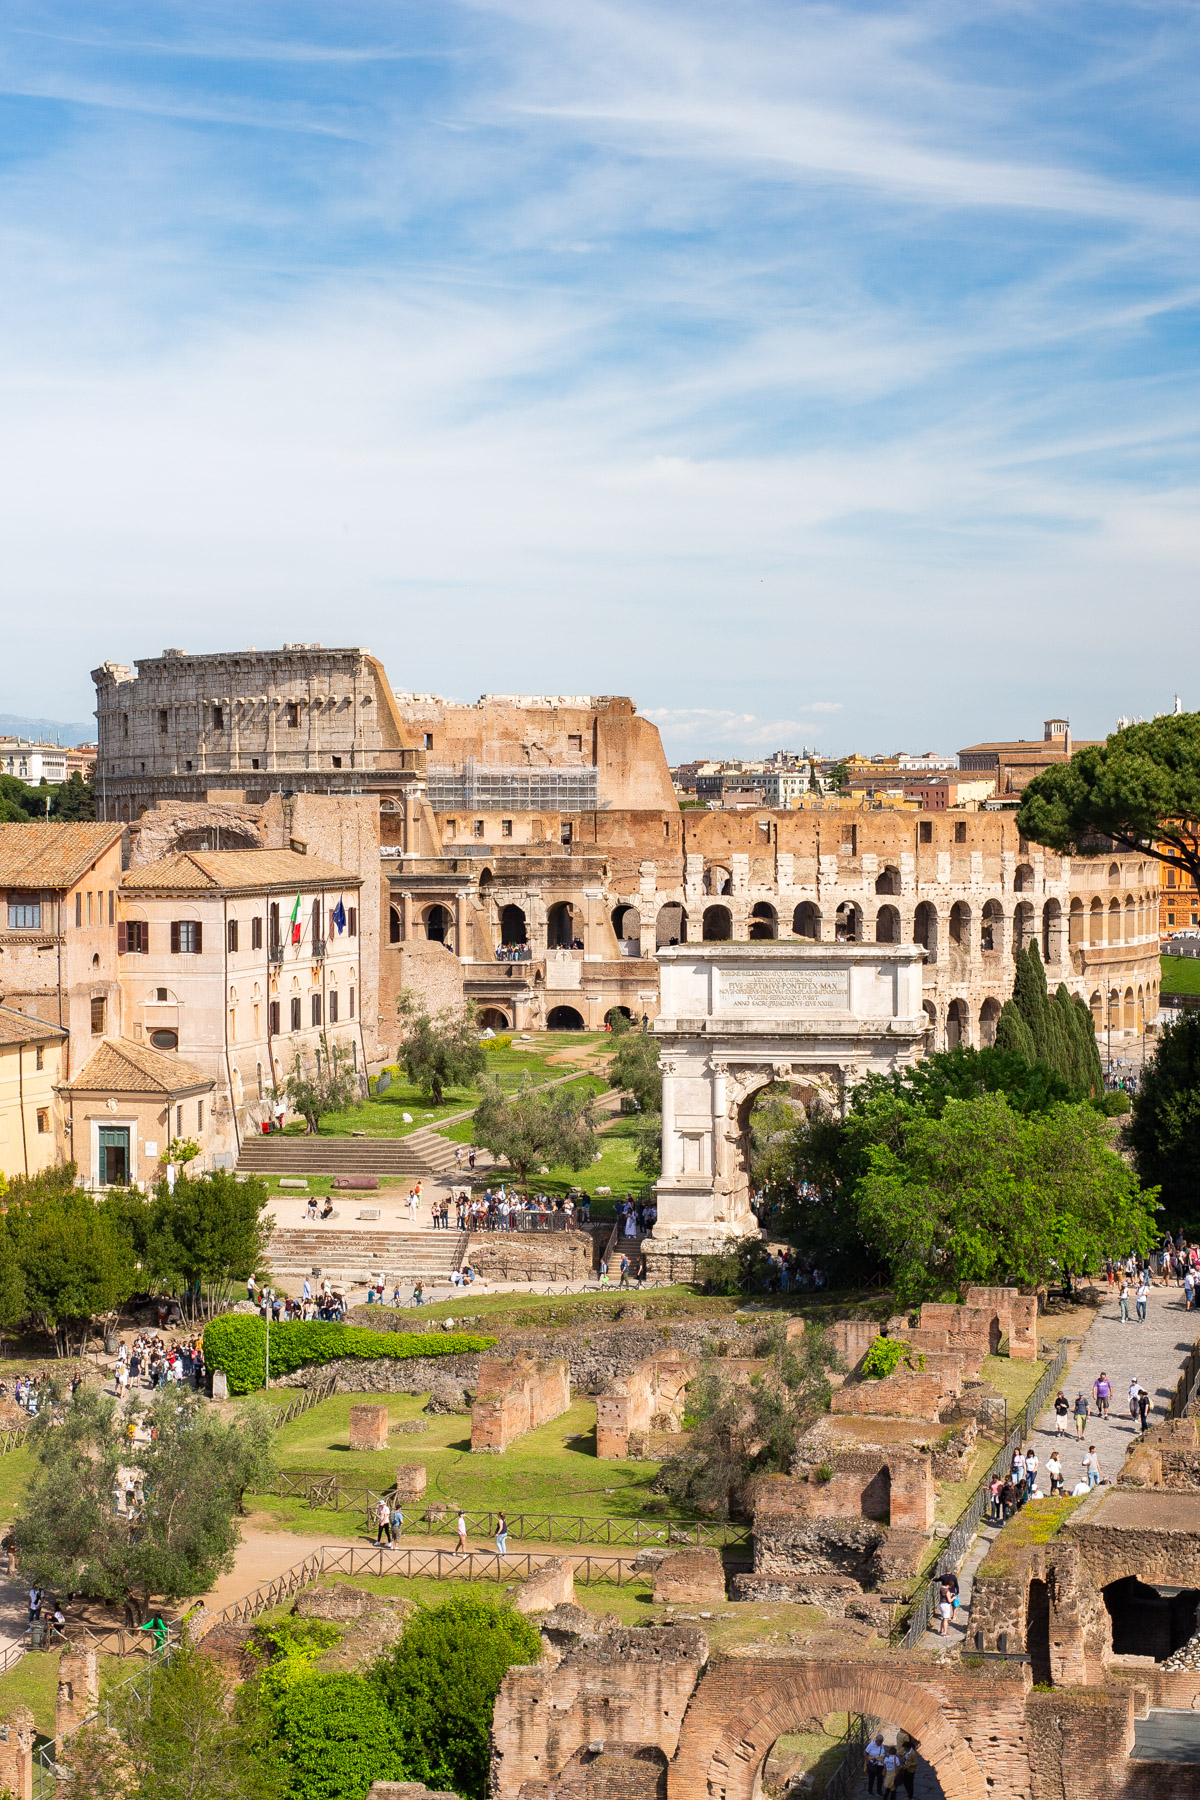 Best views in Rome
Palatine Hill